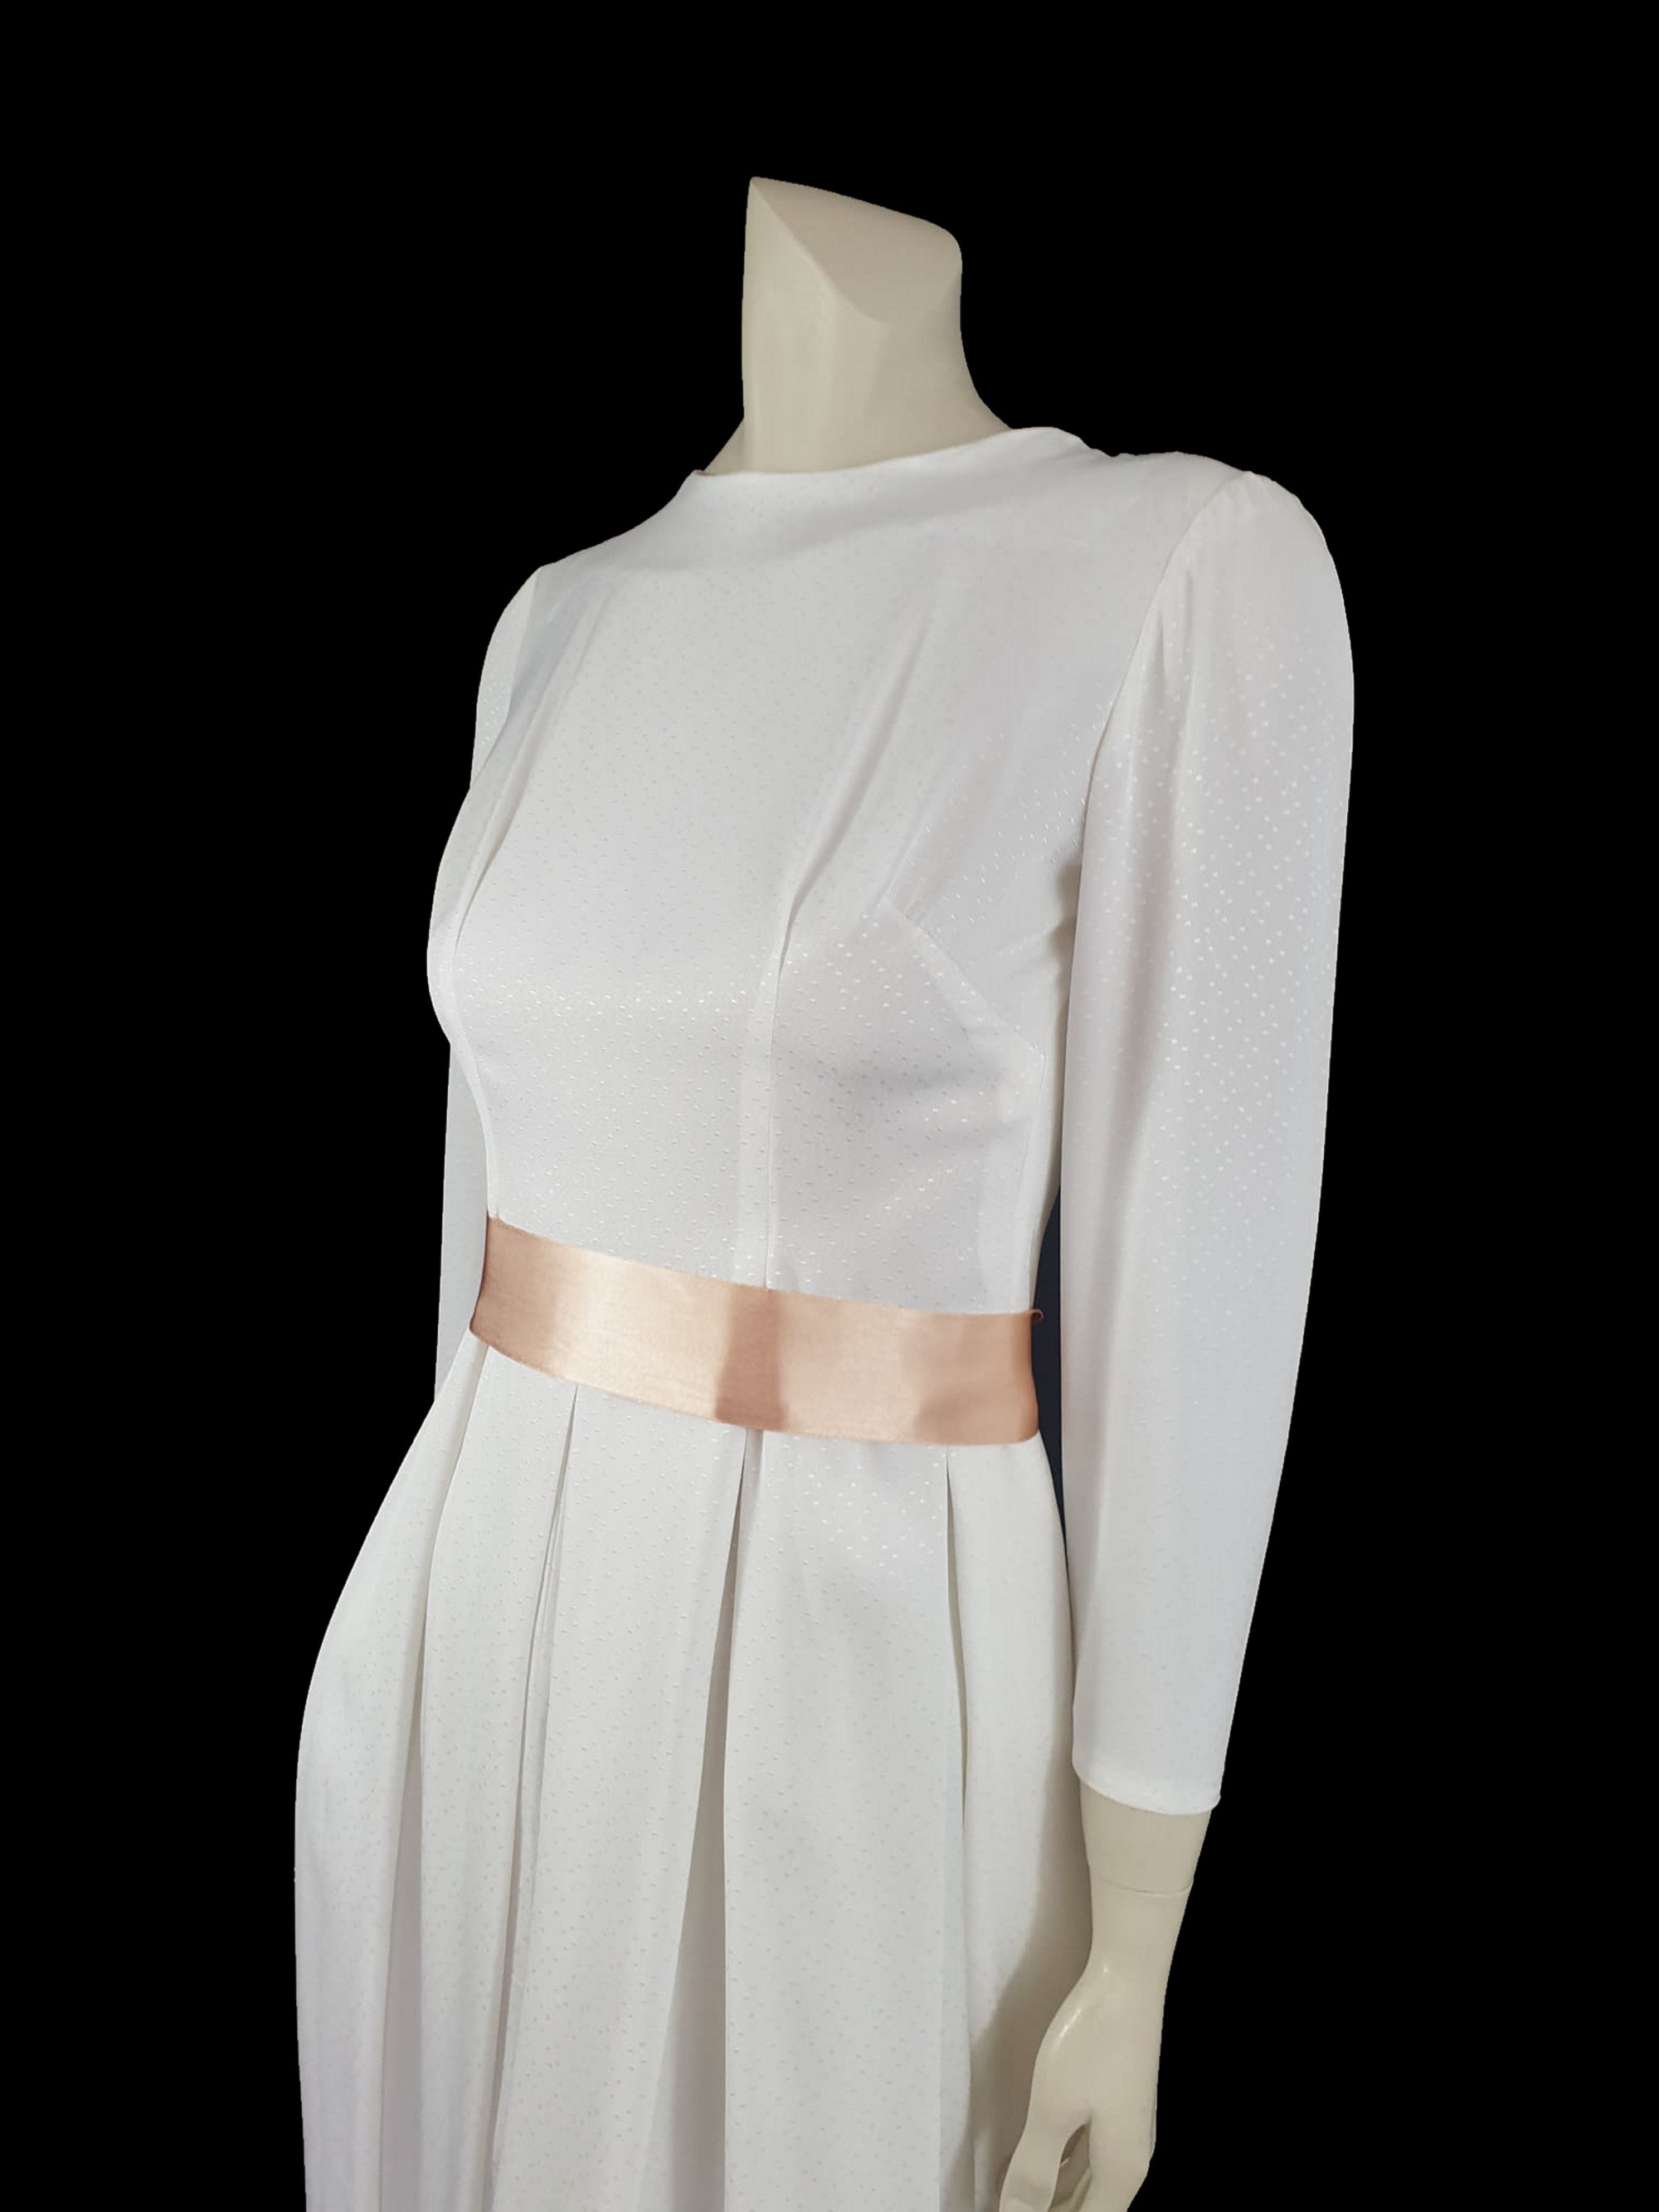 1960s white long sleeved dress with pleated skirt